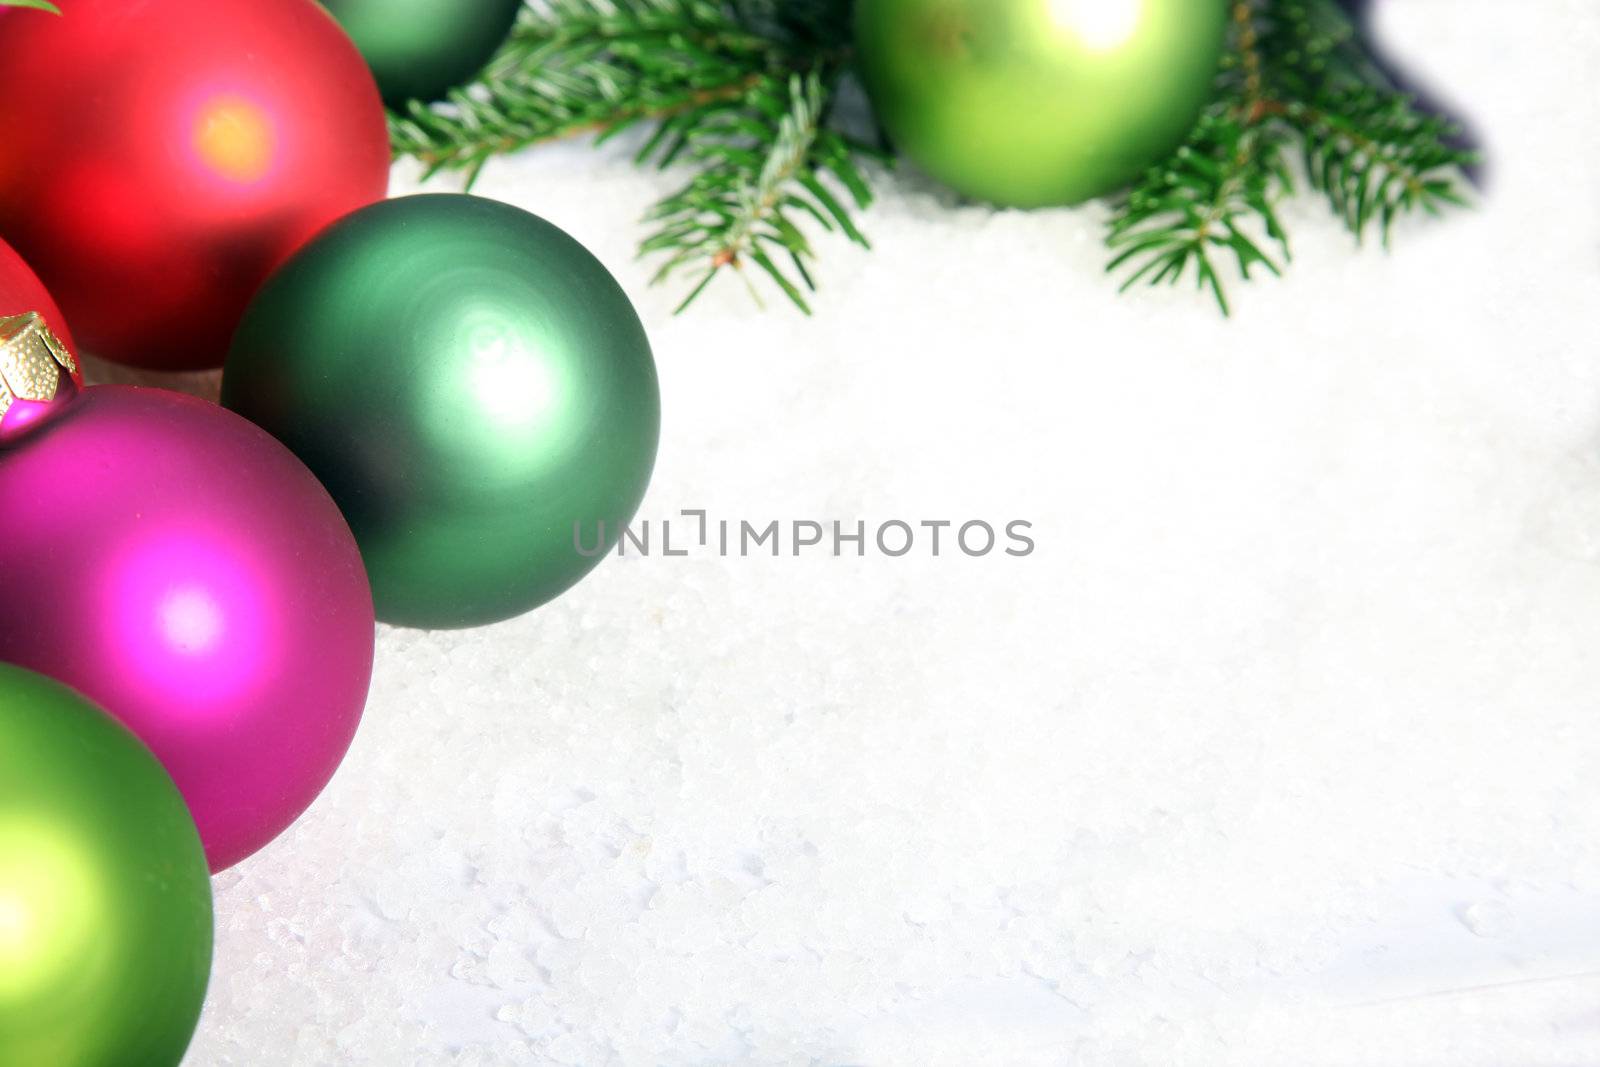 Colorful Christmas baubles by Farina6000